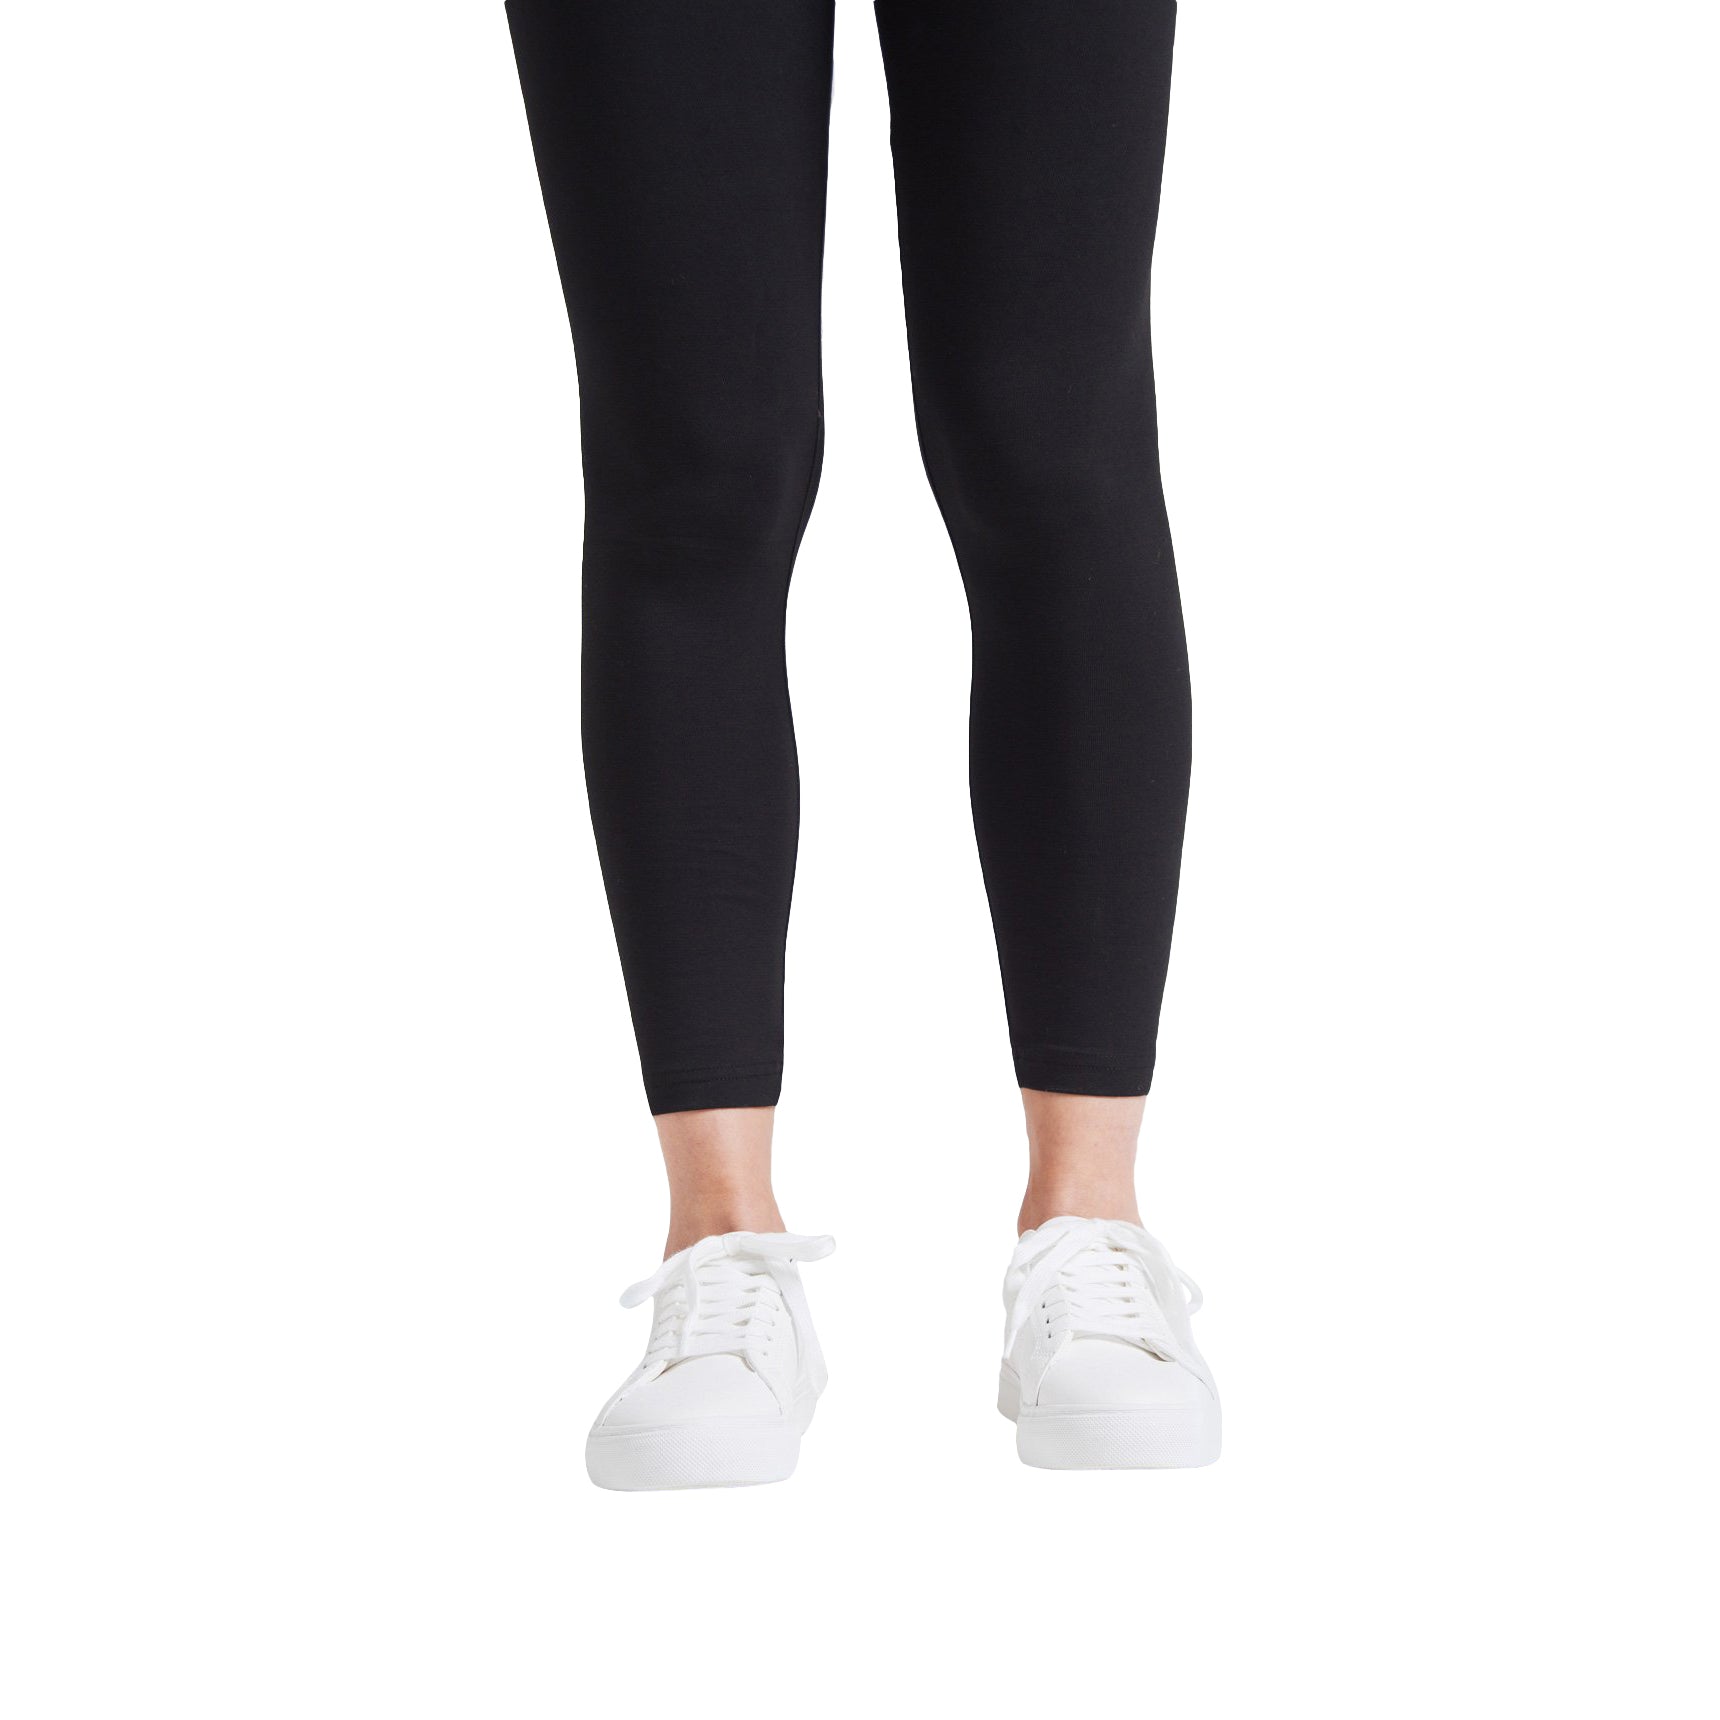 FashionTight Black Classic High Waisted Ankle Length Leggings